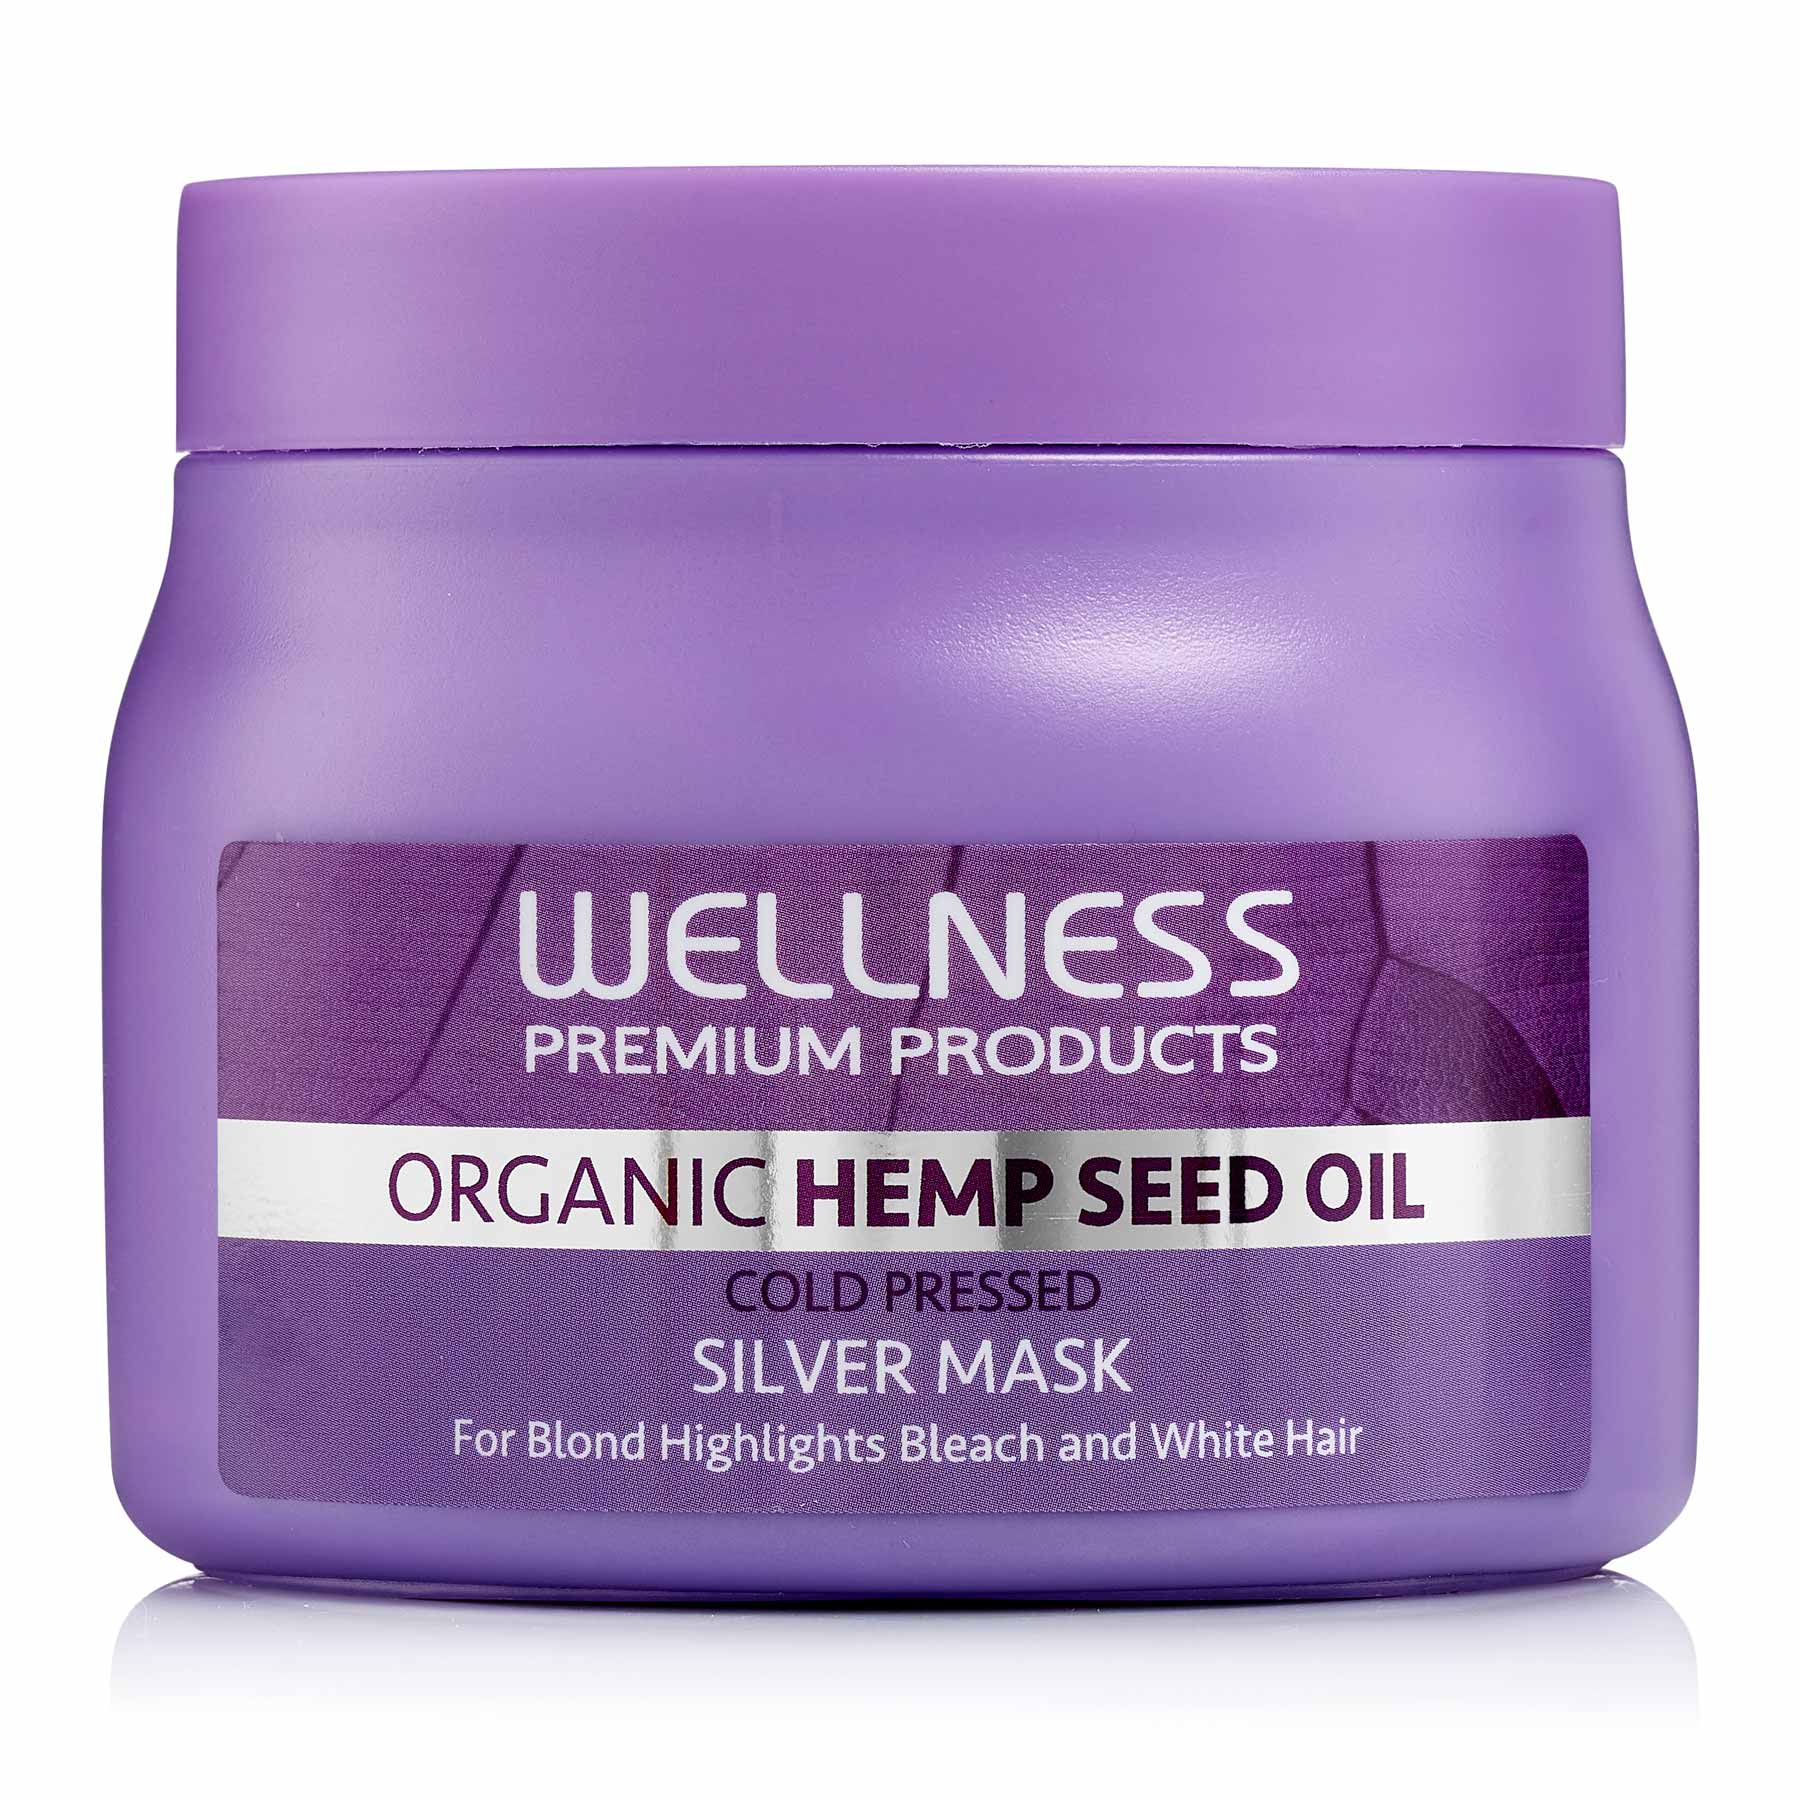 Wellness Premium Products Silver Mask